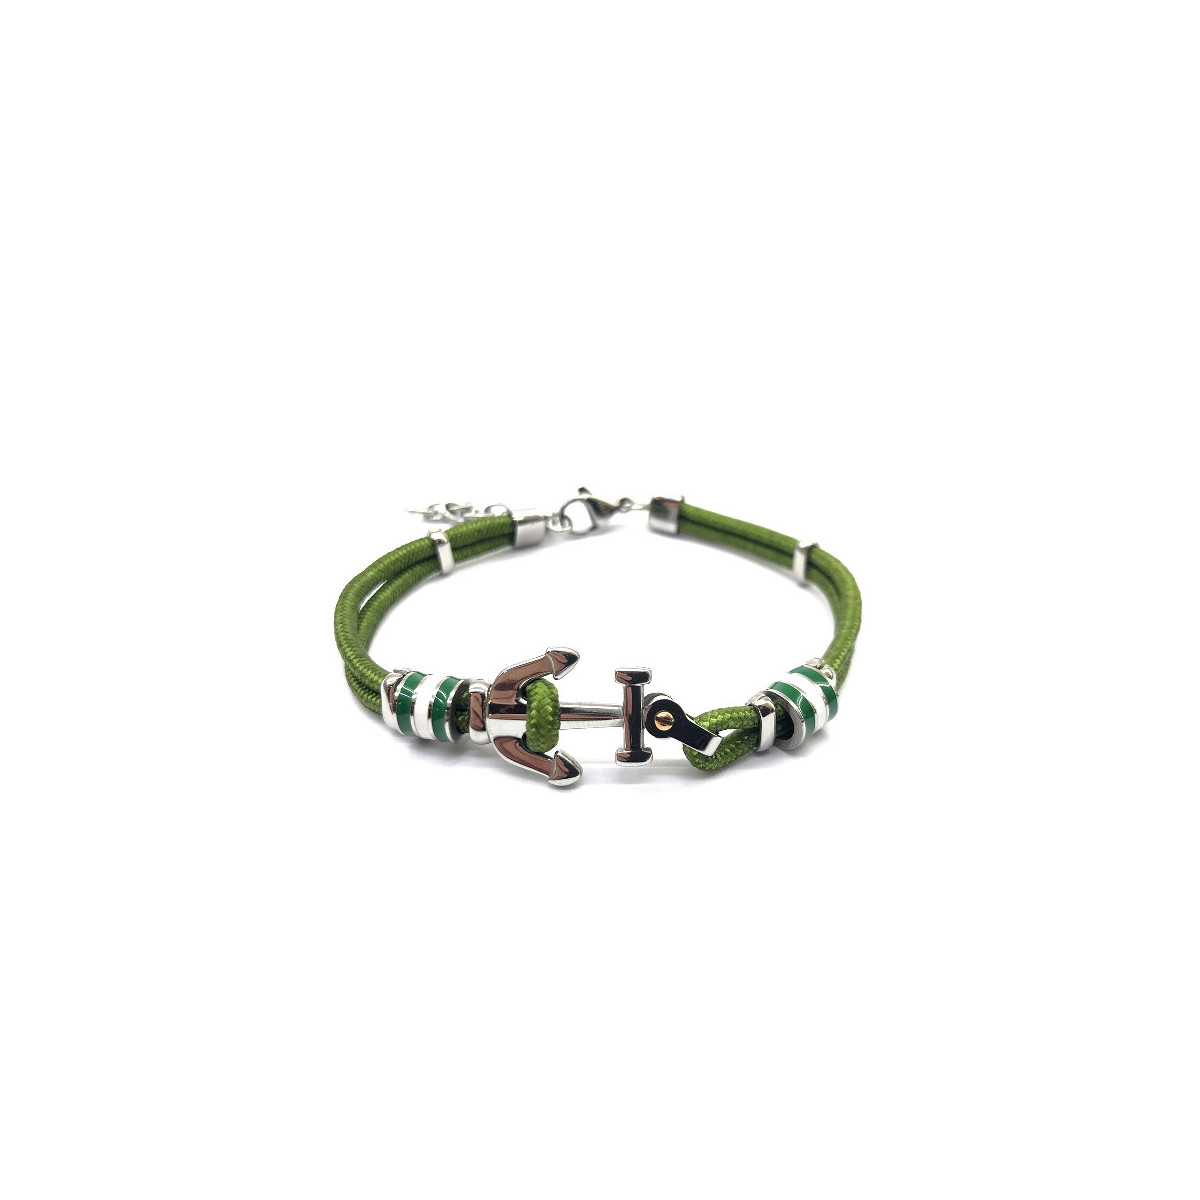 STAINLESS STEEL BRACELET WITH GREEN NYLON AND ANCHOR